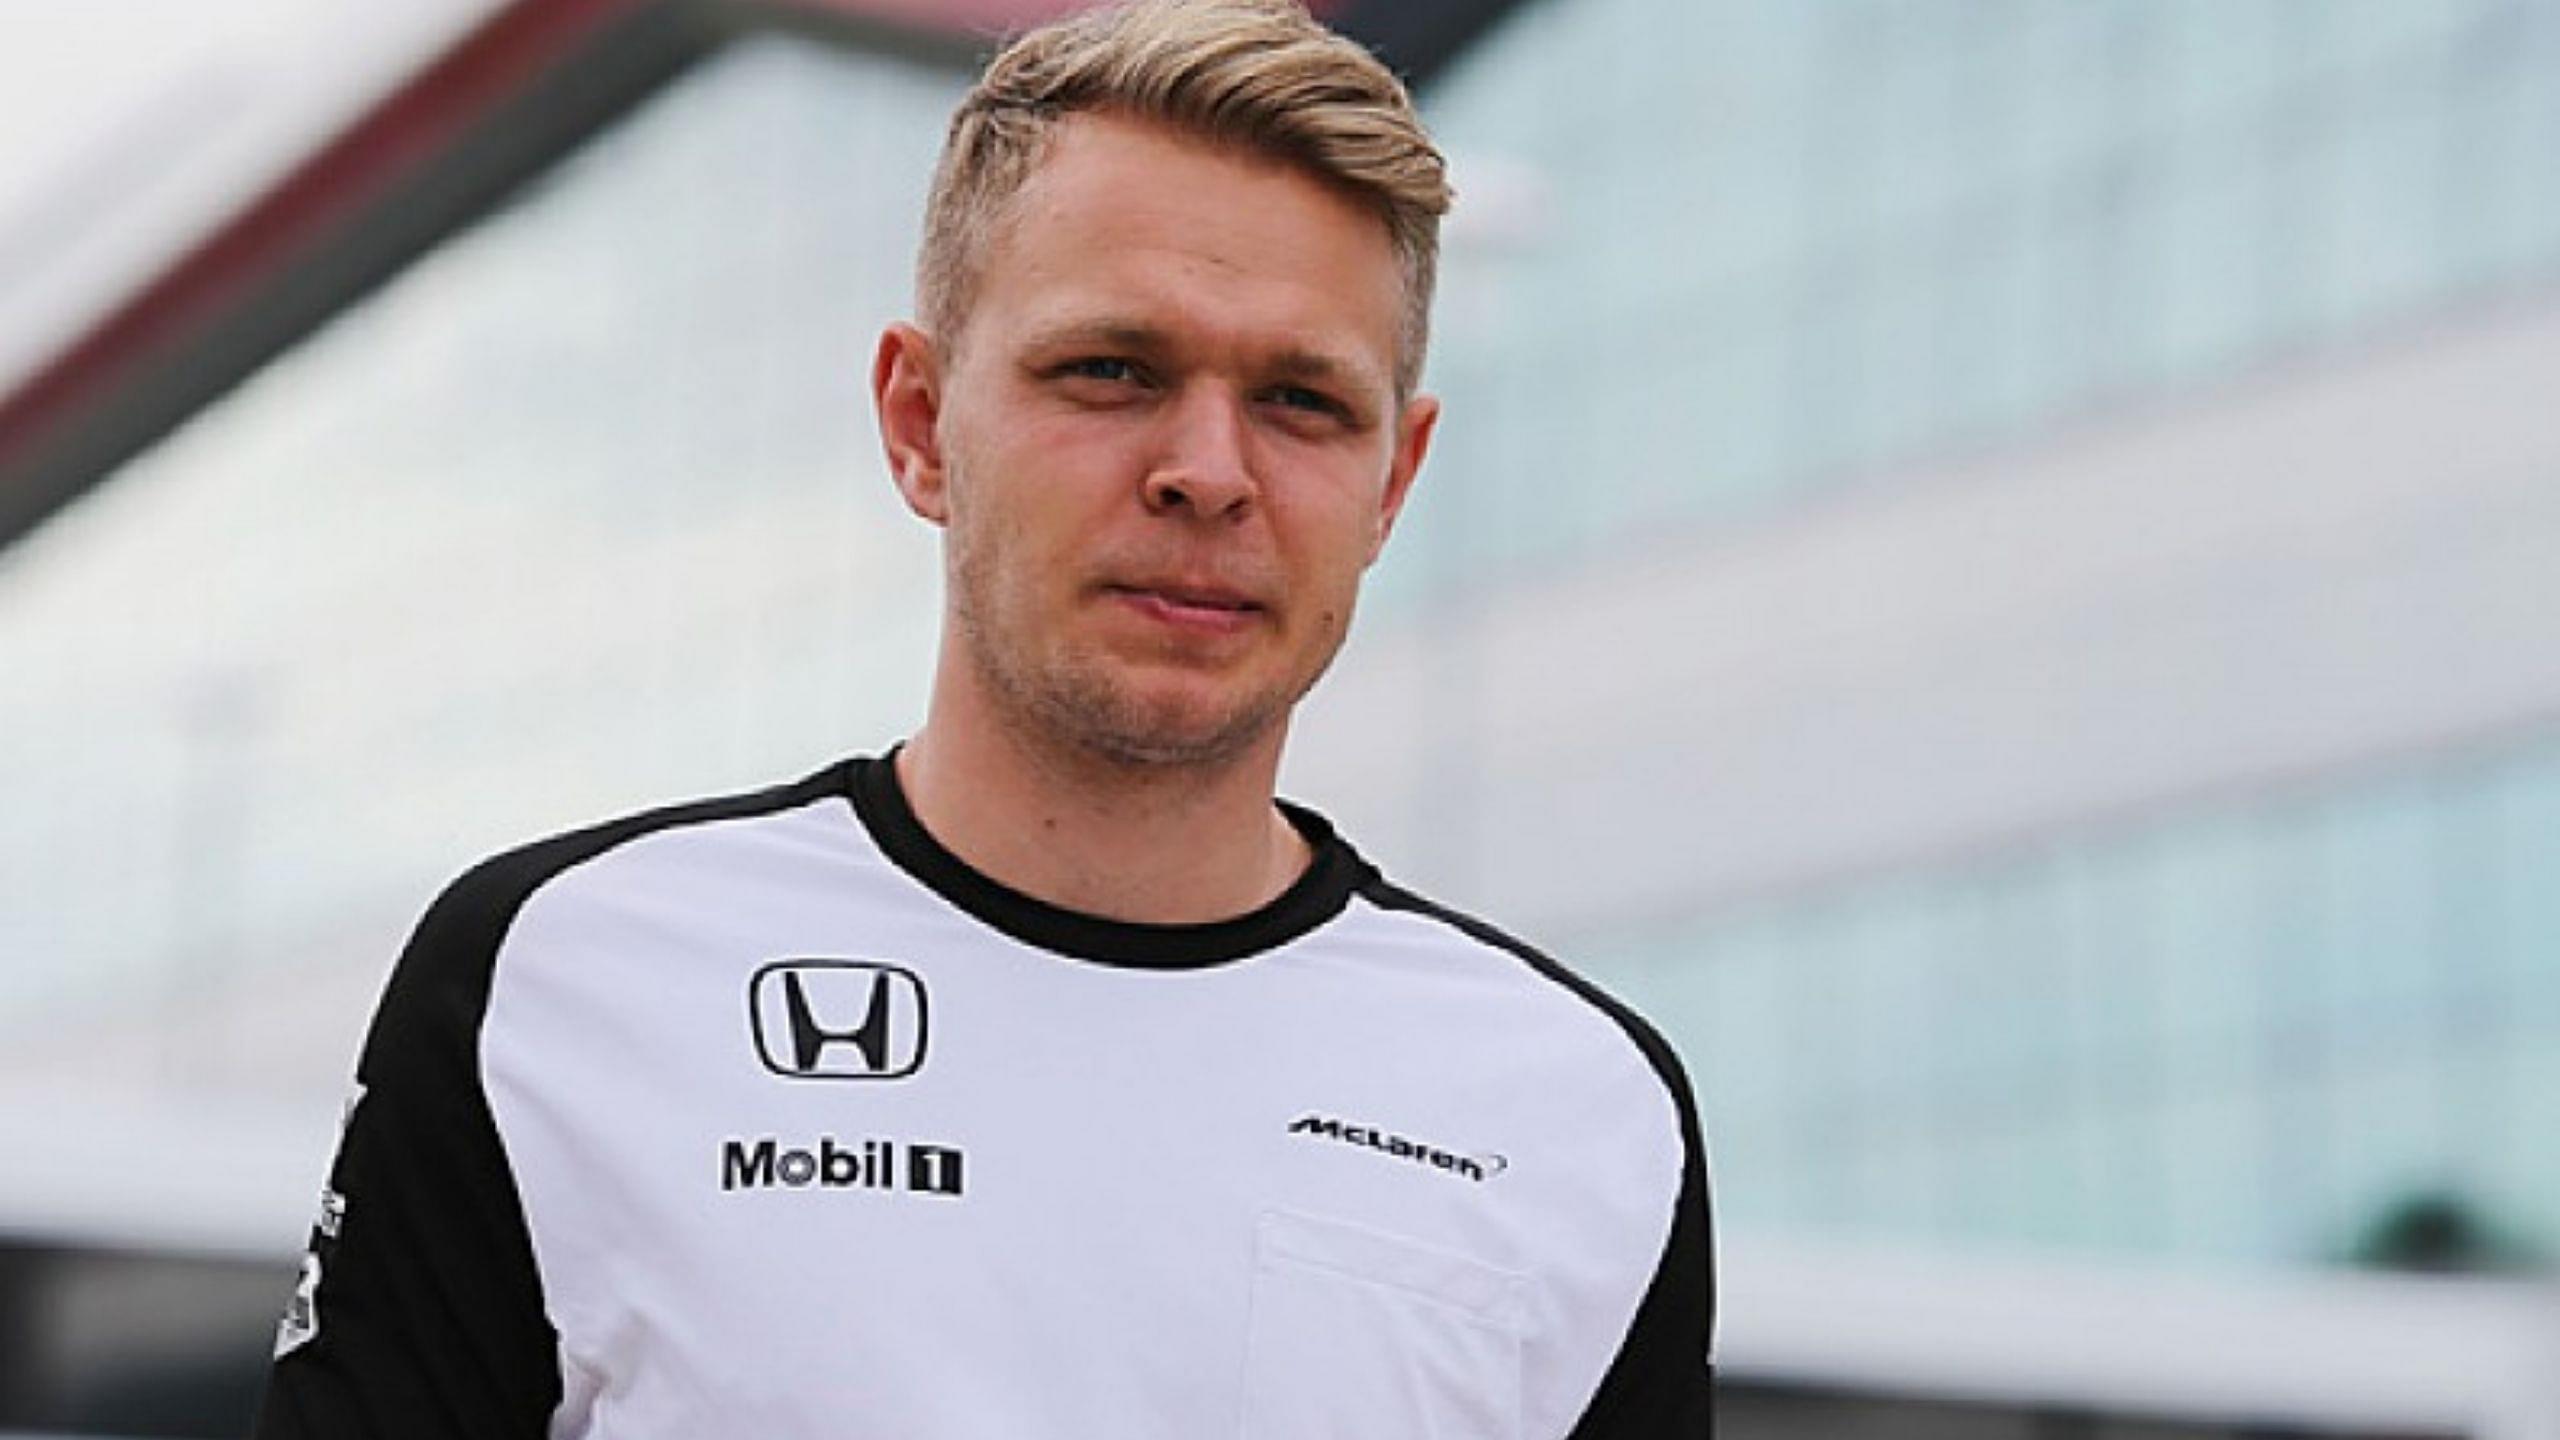 Haas F1 driver Kevin Magnussen sets his sights on sportscar racing with Chip Ganassi Racing's IMSA team